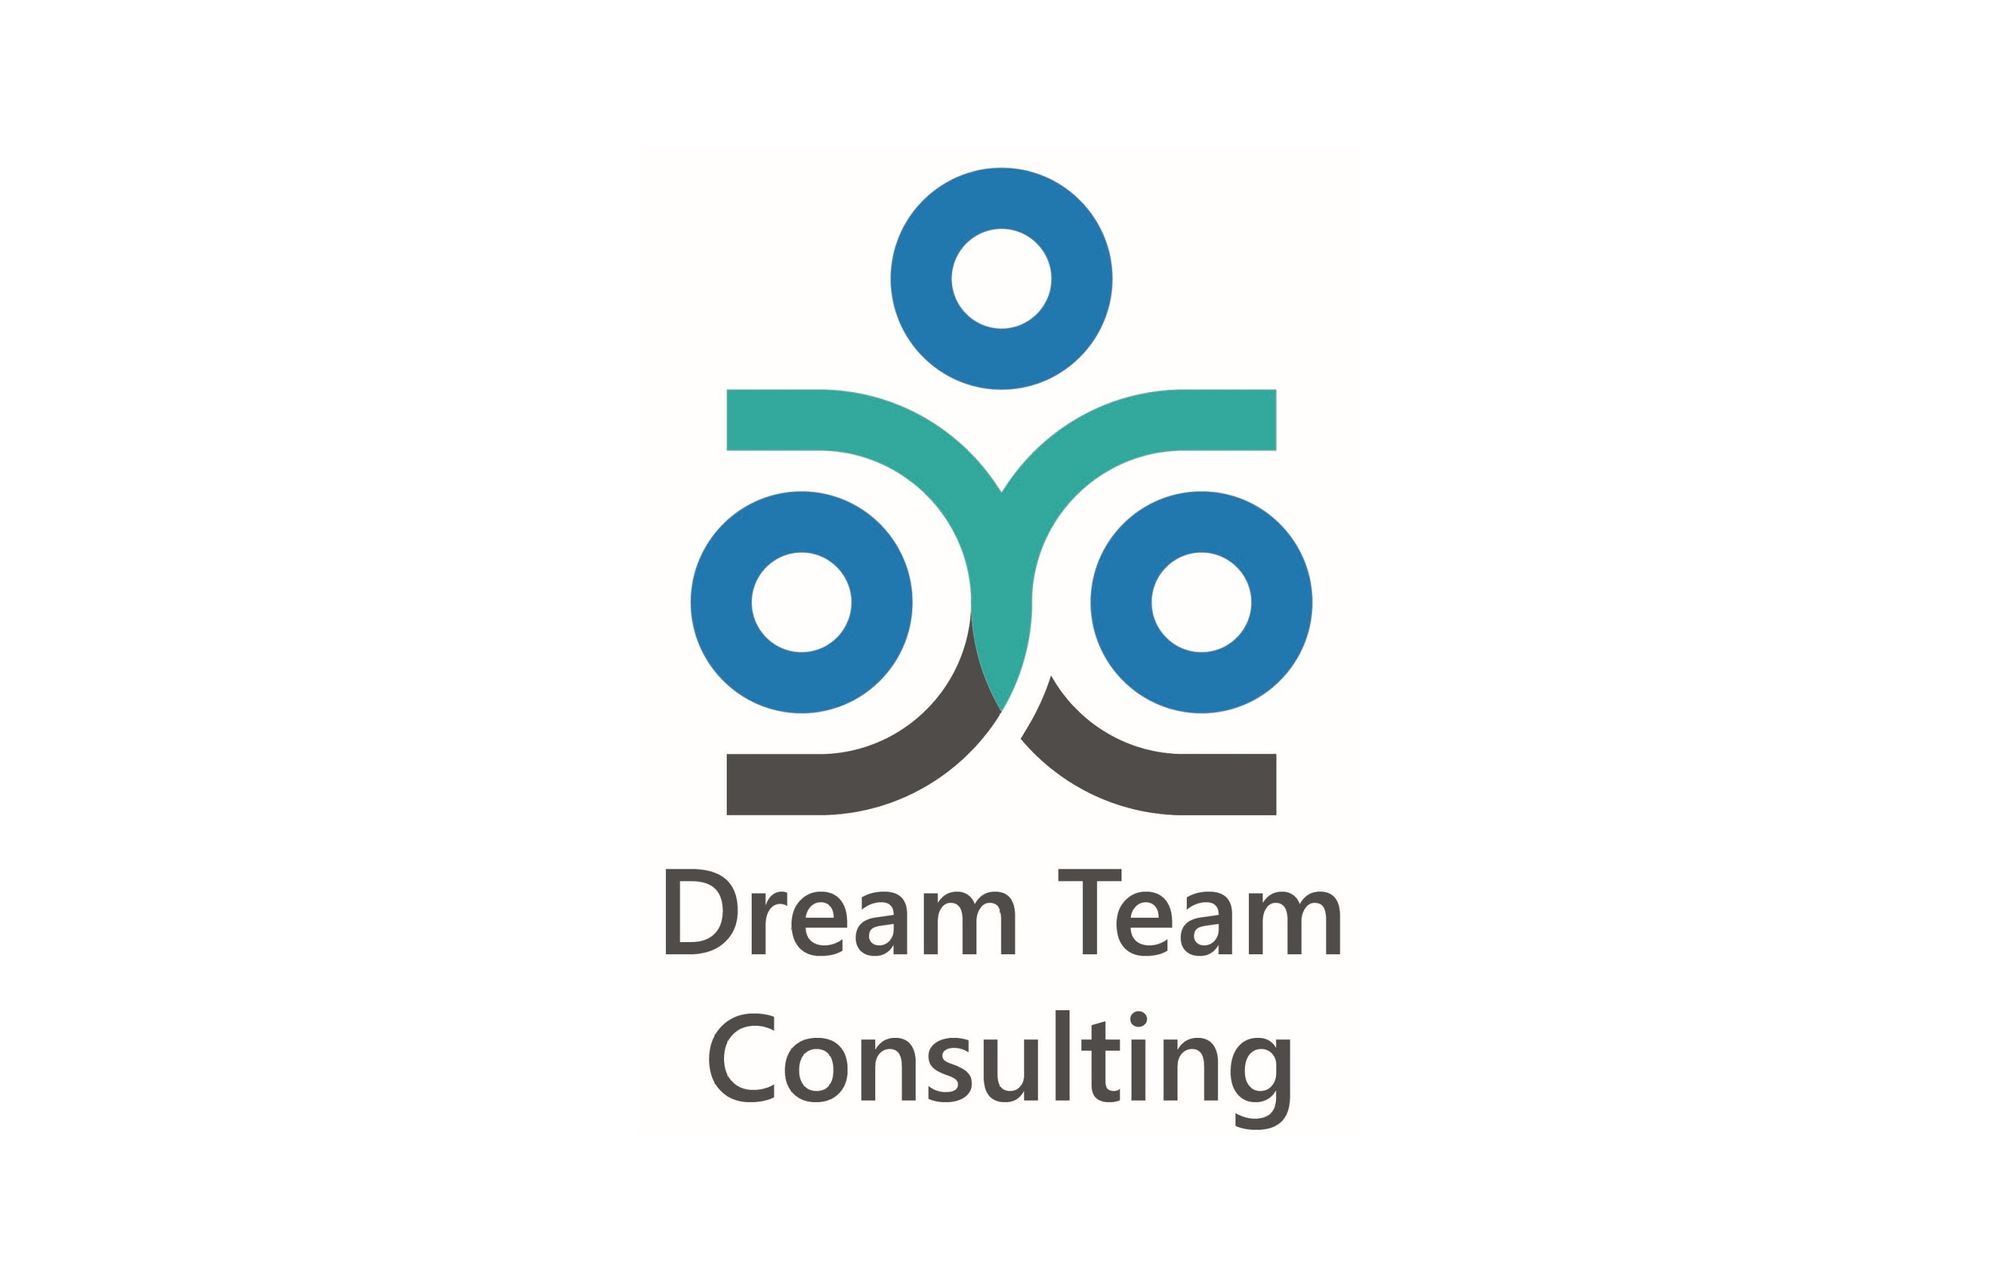 Dream Team Consulting Firm - Dr. Jermaine Johnson